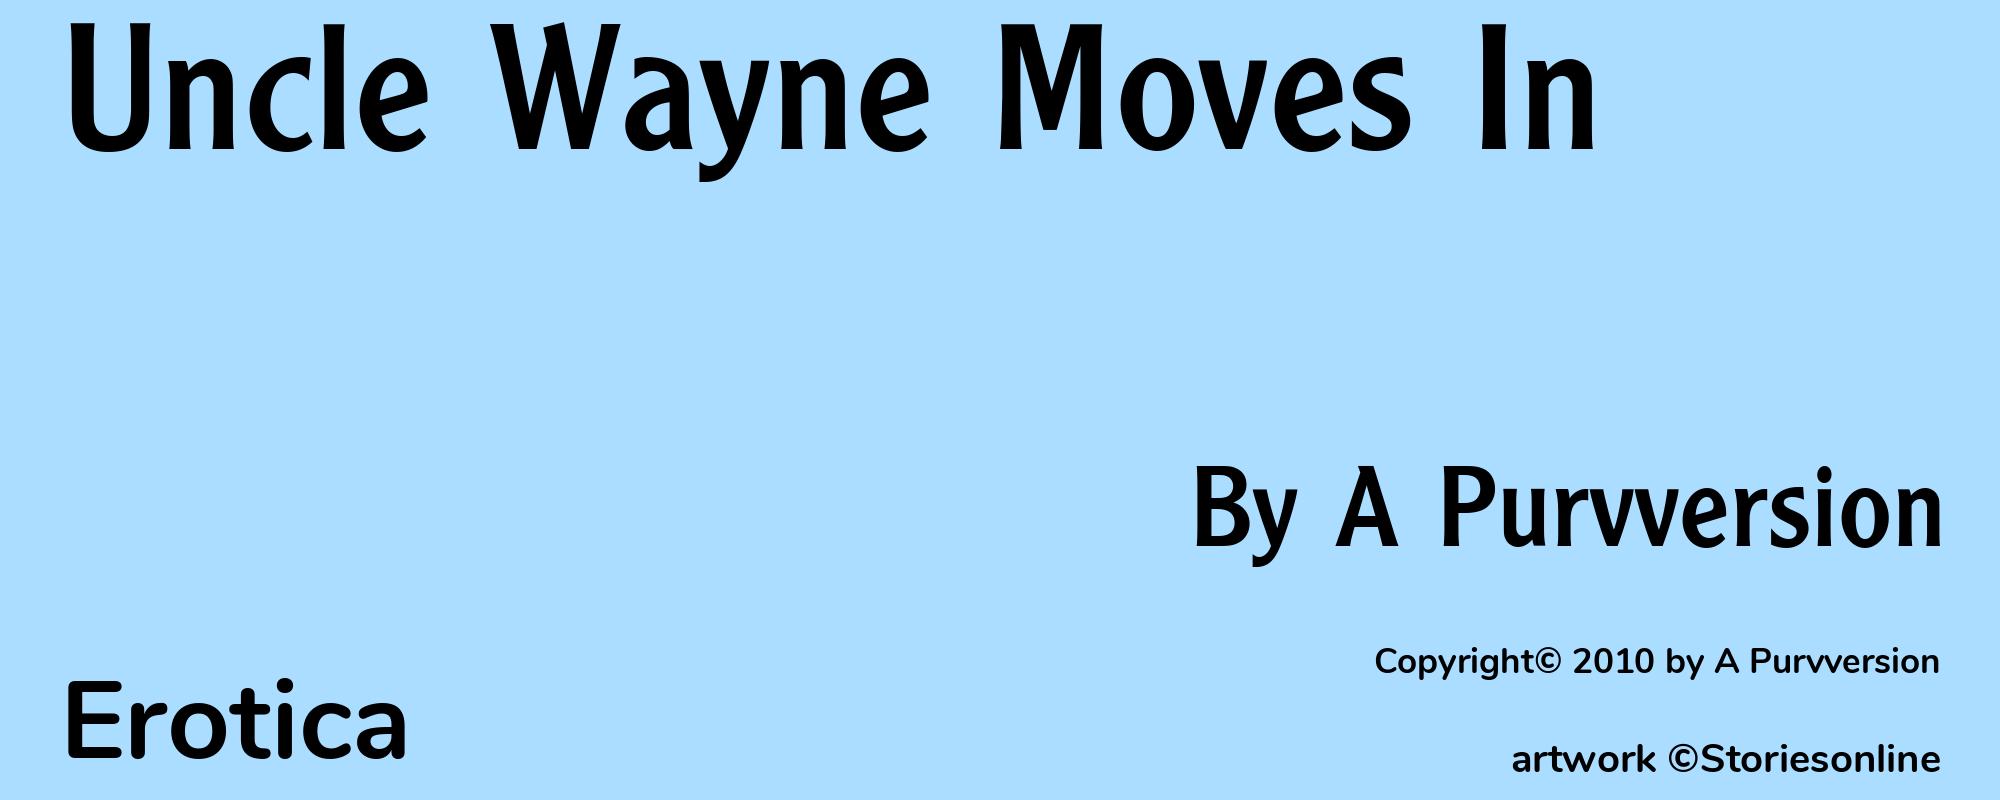 Uncle Wayne Moves In - Cover